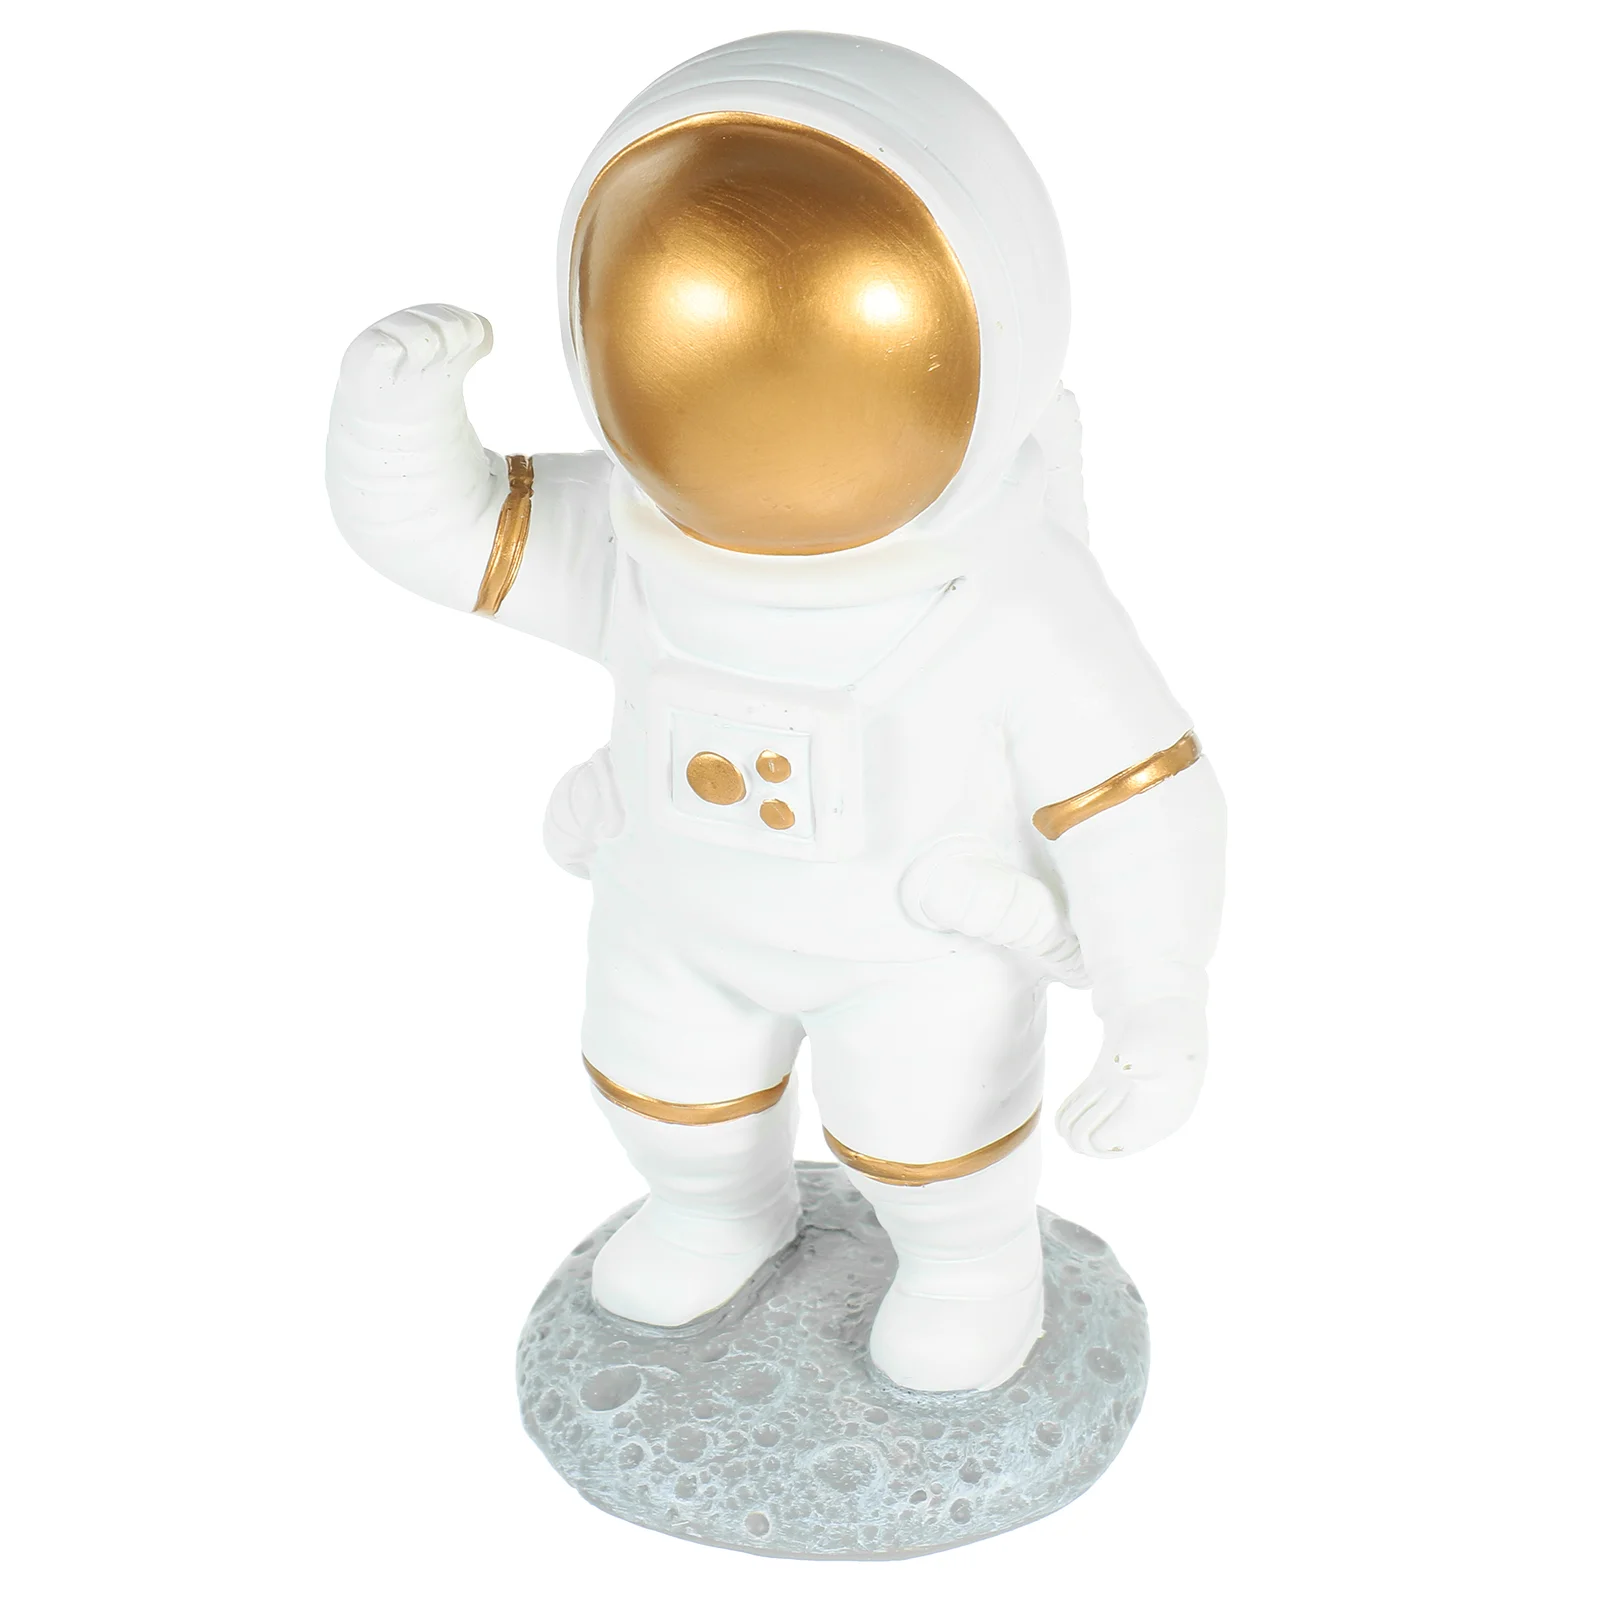 

Astronaut Ornaments Kids Gifts Resin Figurines Hand Made Childrens Room Decor Decoration Spaceman Model